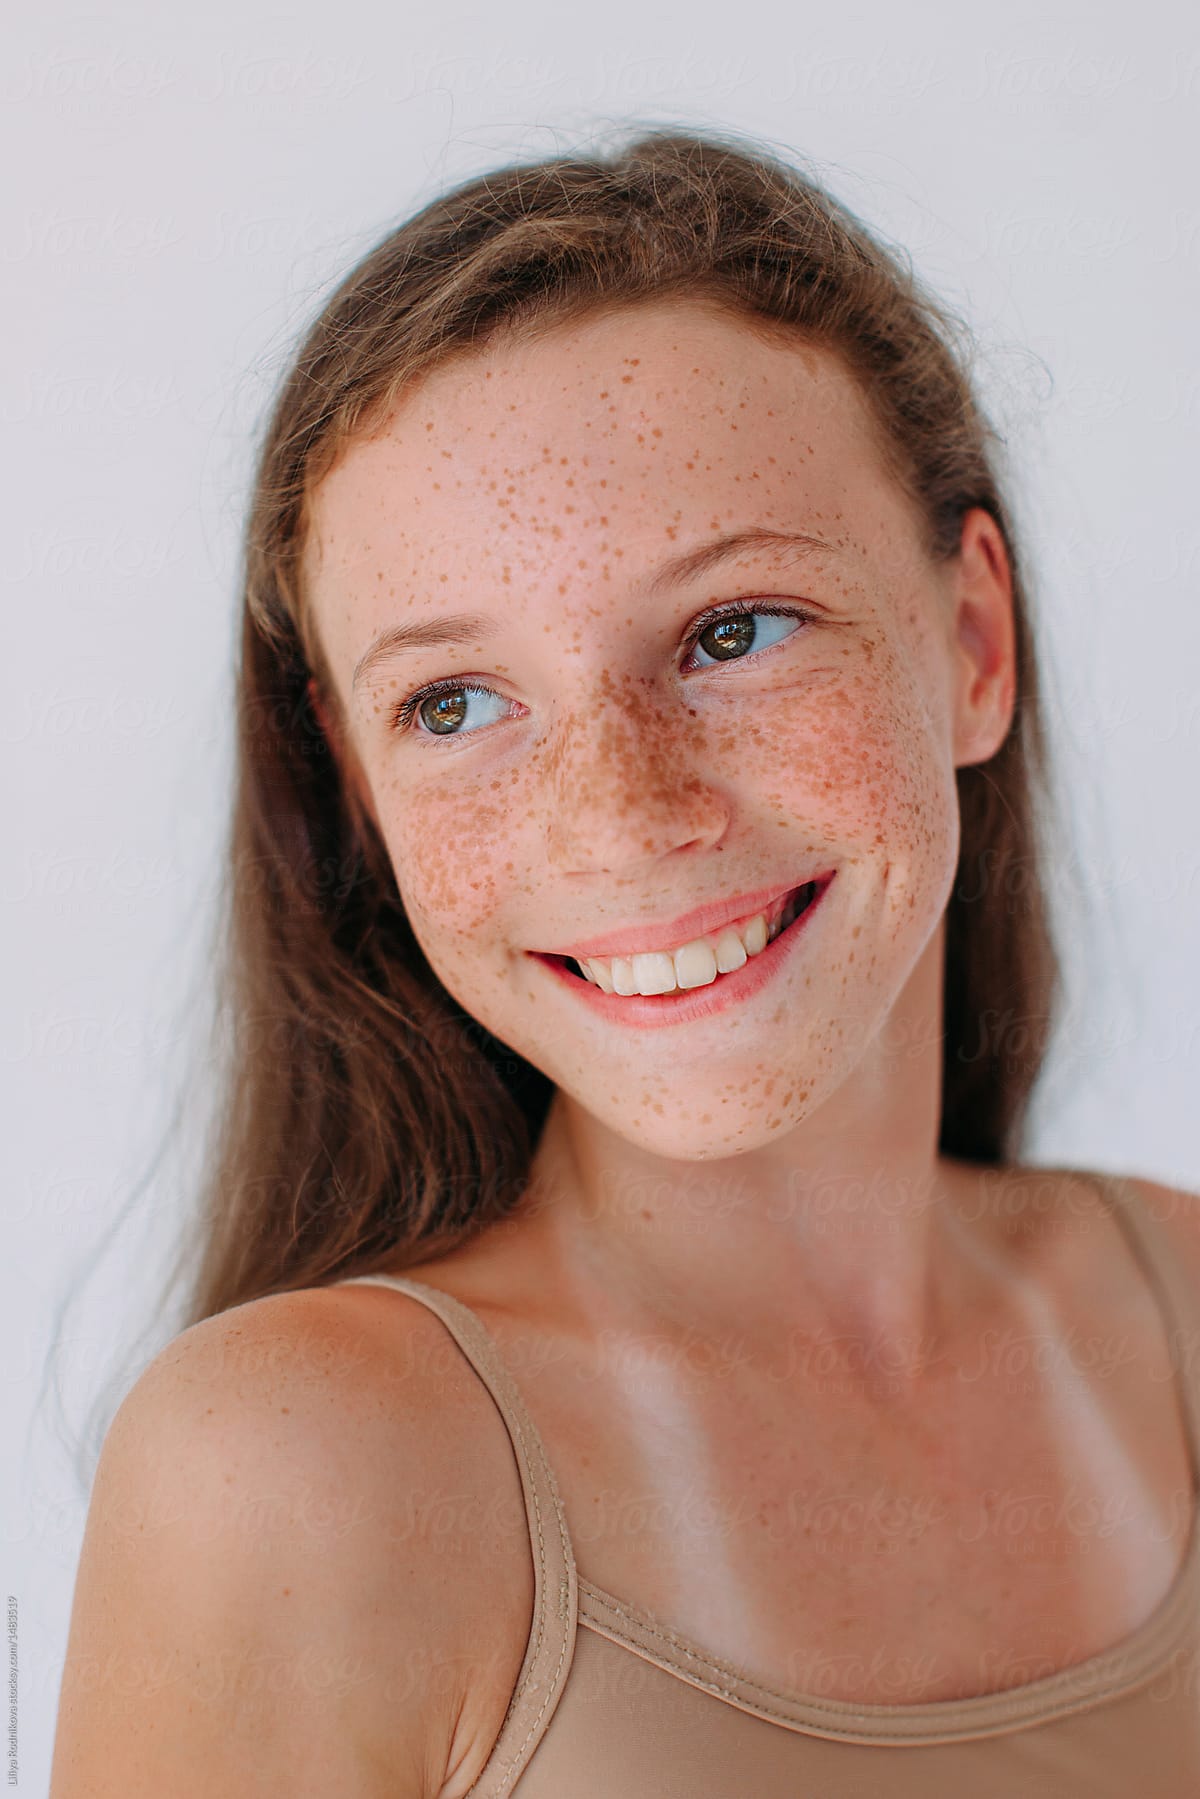 Portrait Of Smiling On Portrait Of Attractive Smiling With Freckles.